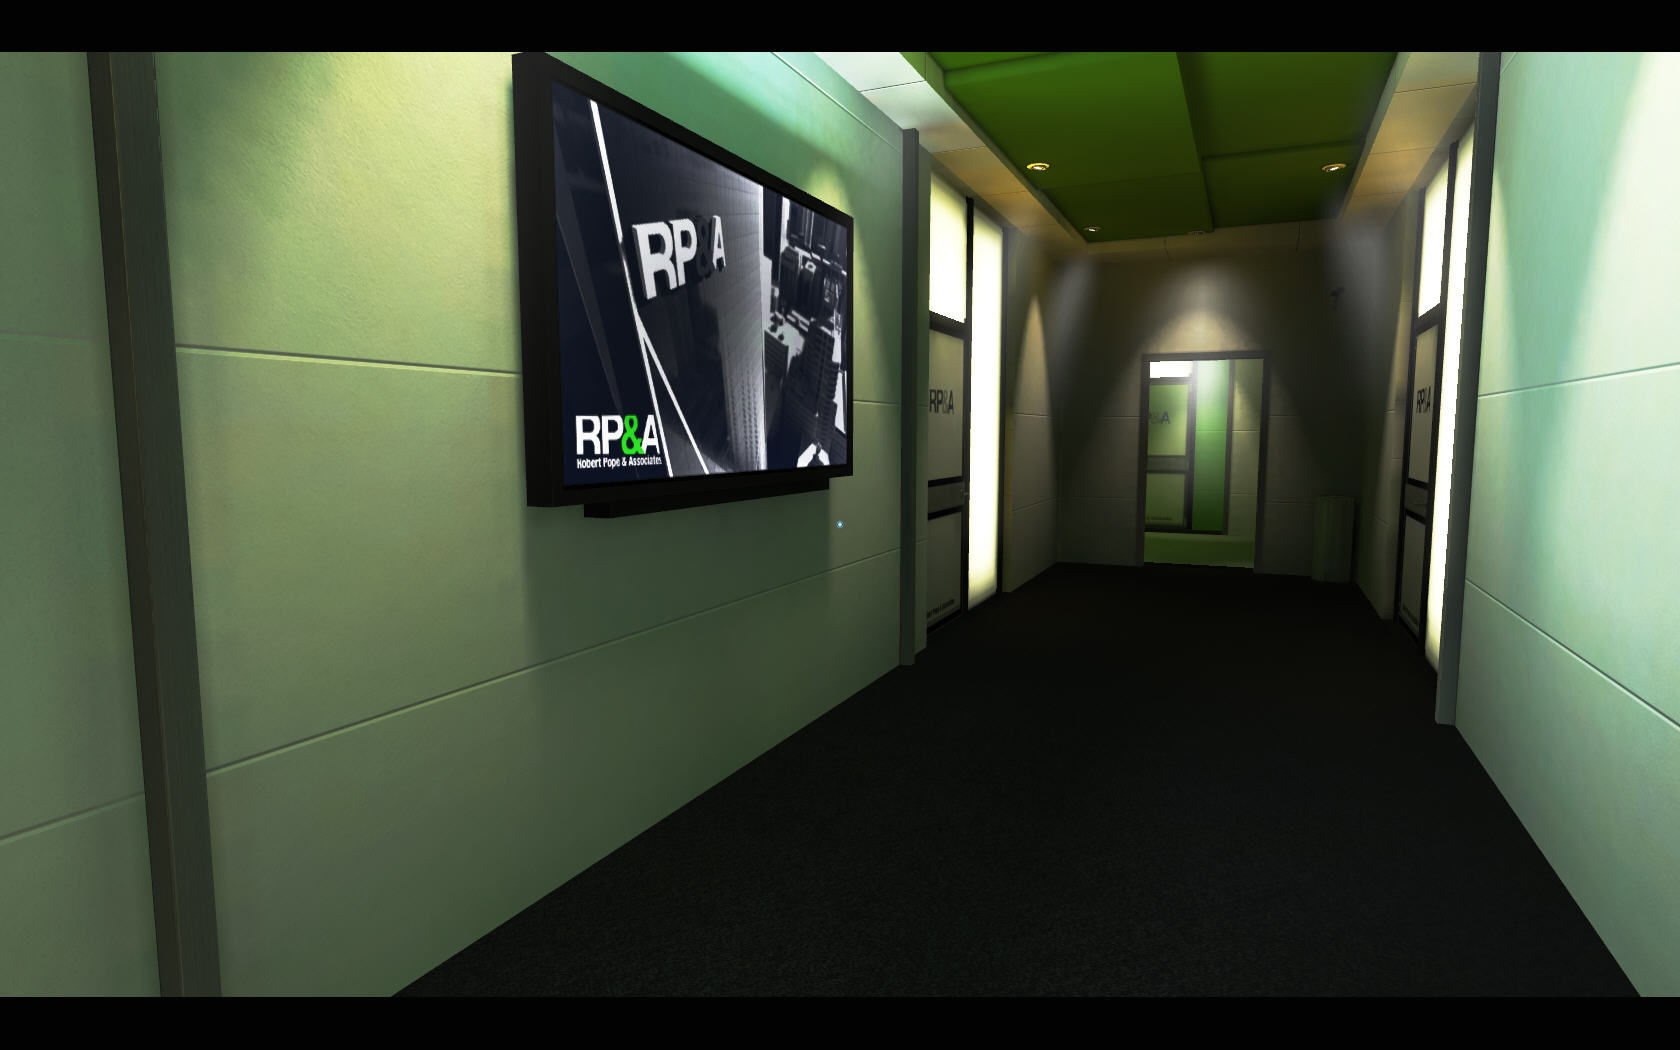 Corridor with green roof and white walls. TV on wall is showing advertising.